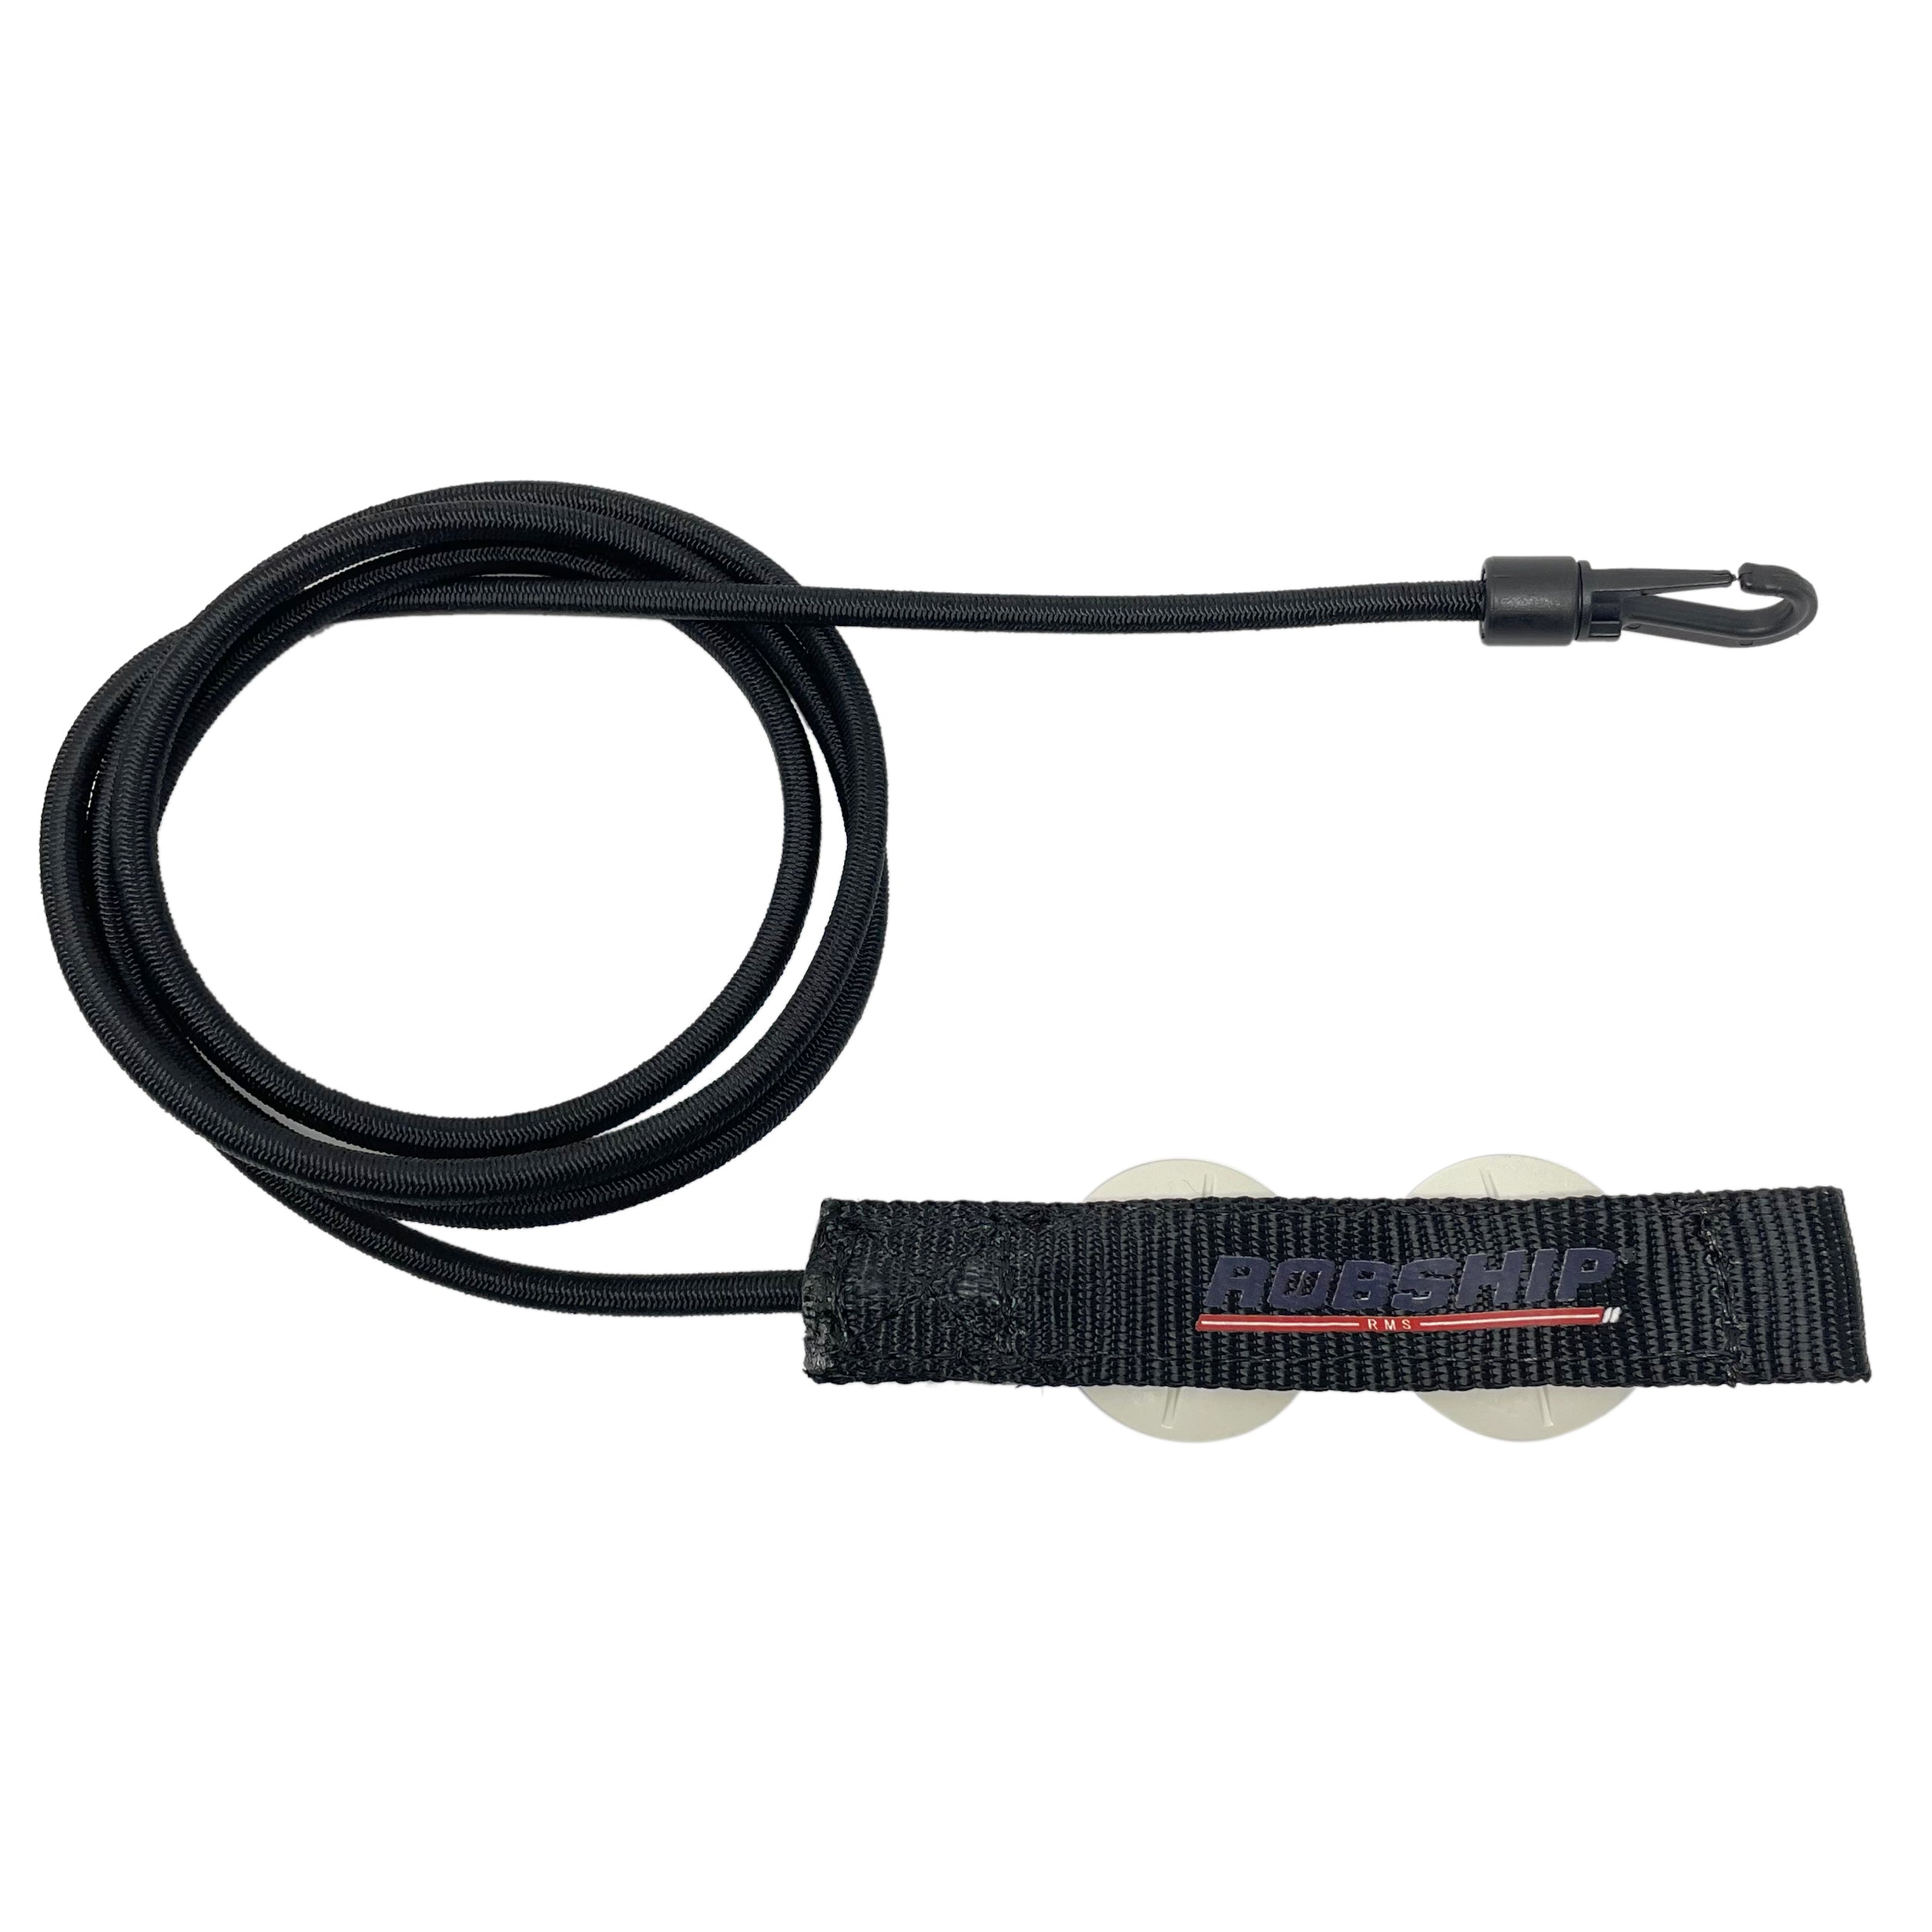 UV resistant electric cable with black fabric lining.